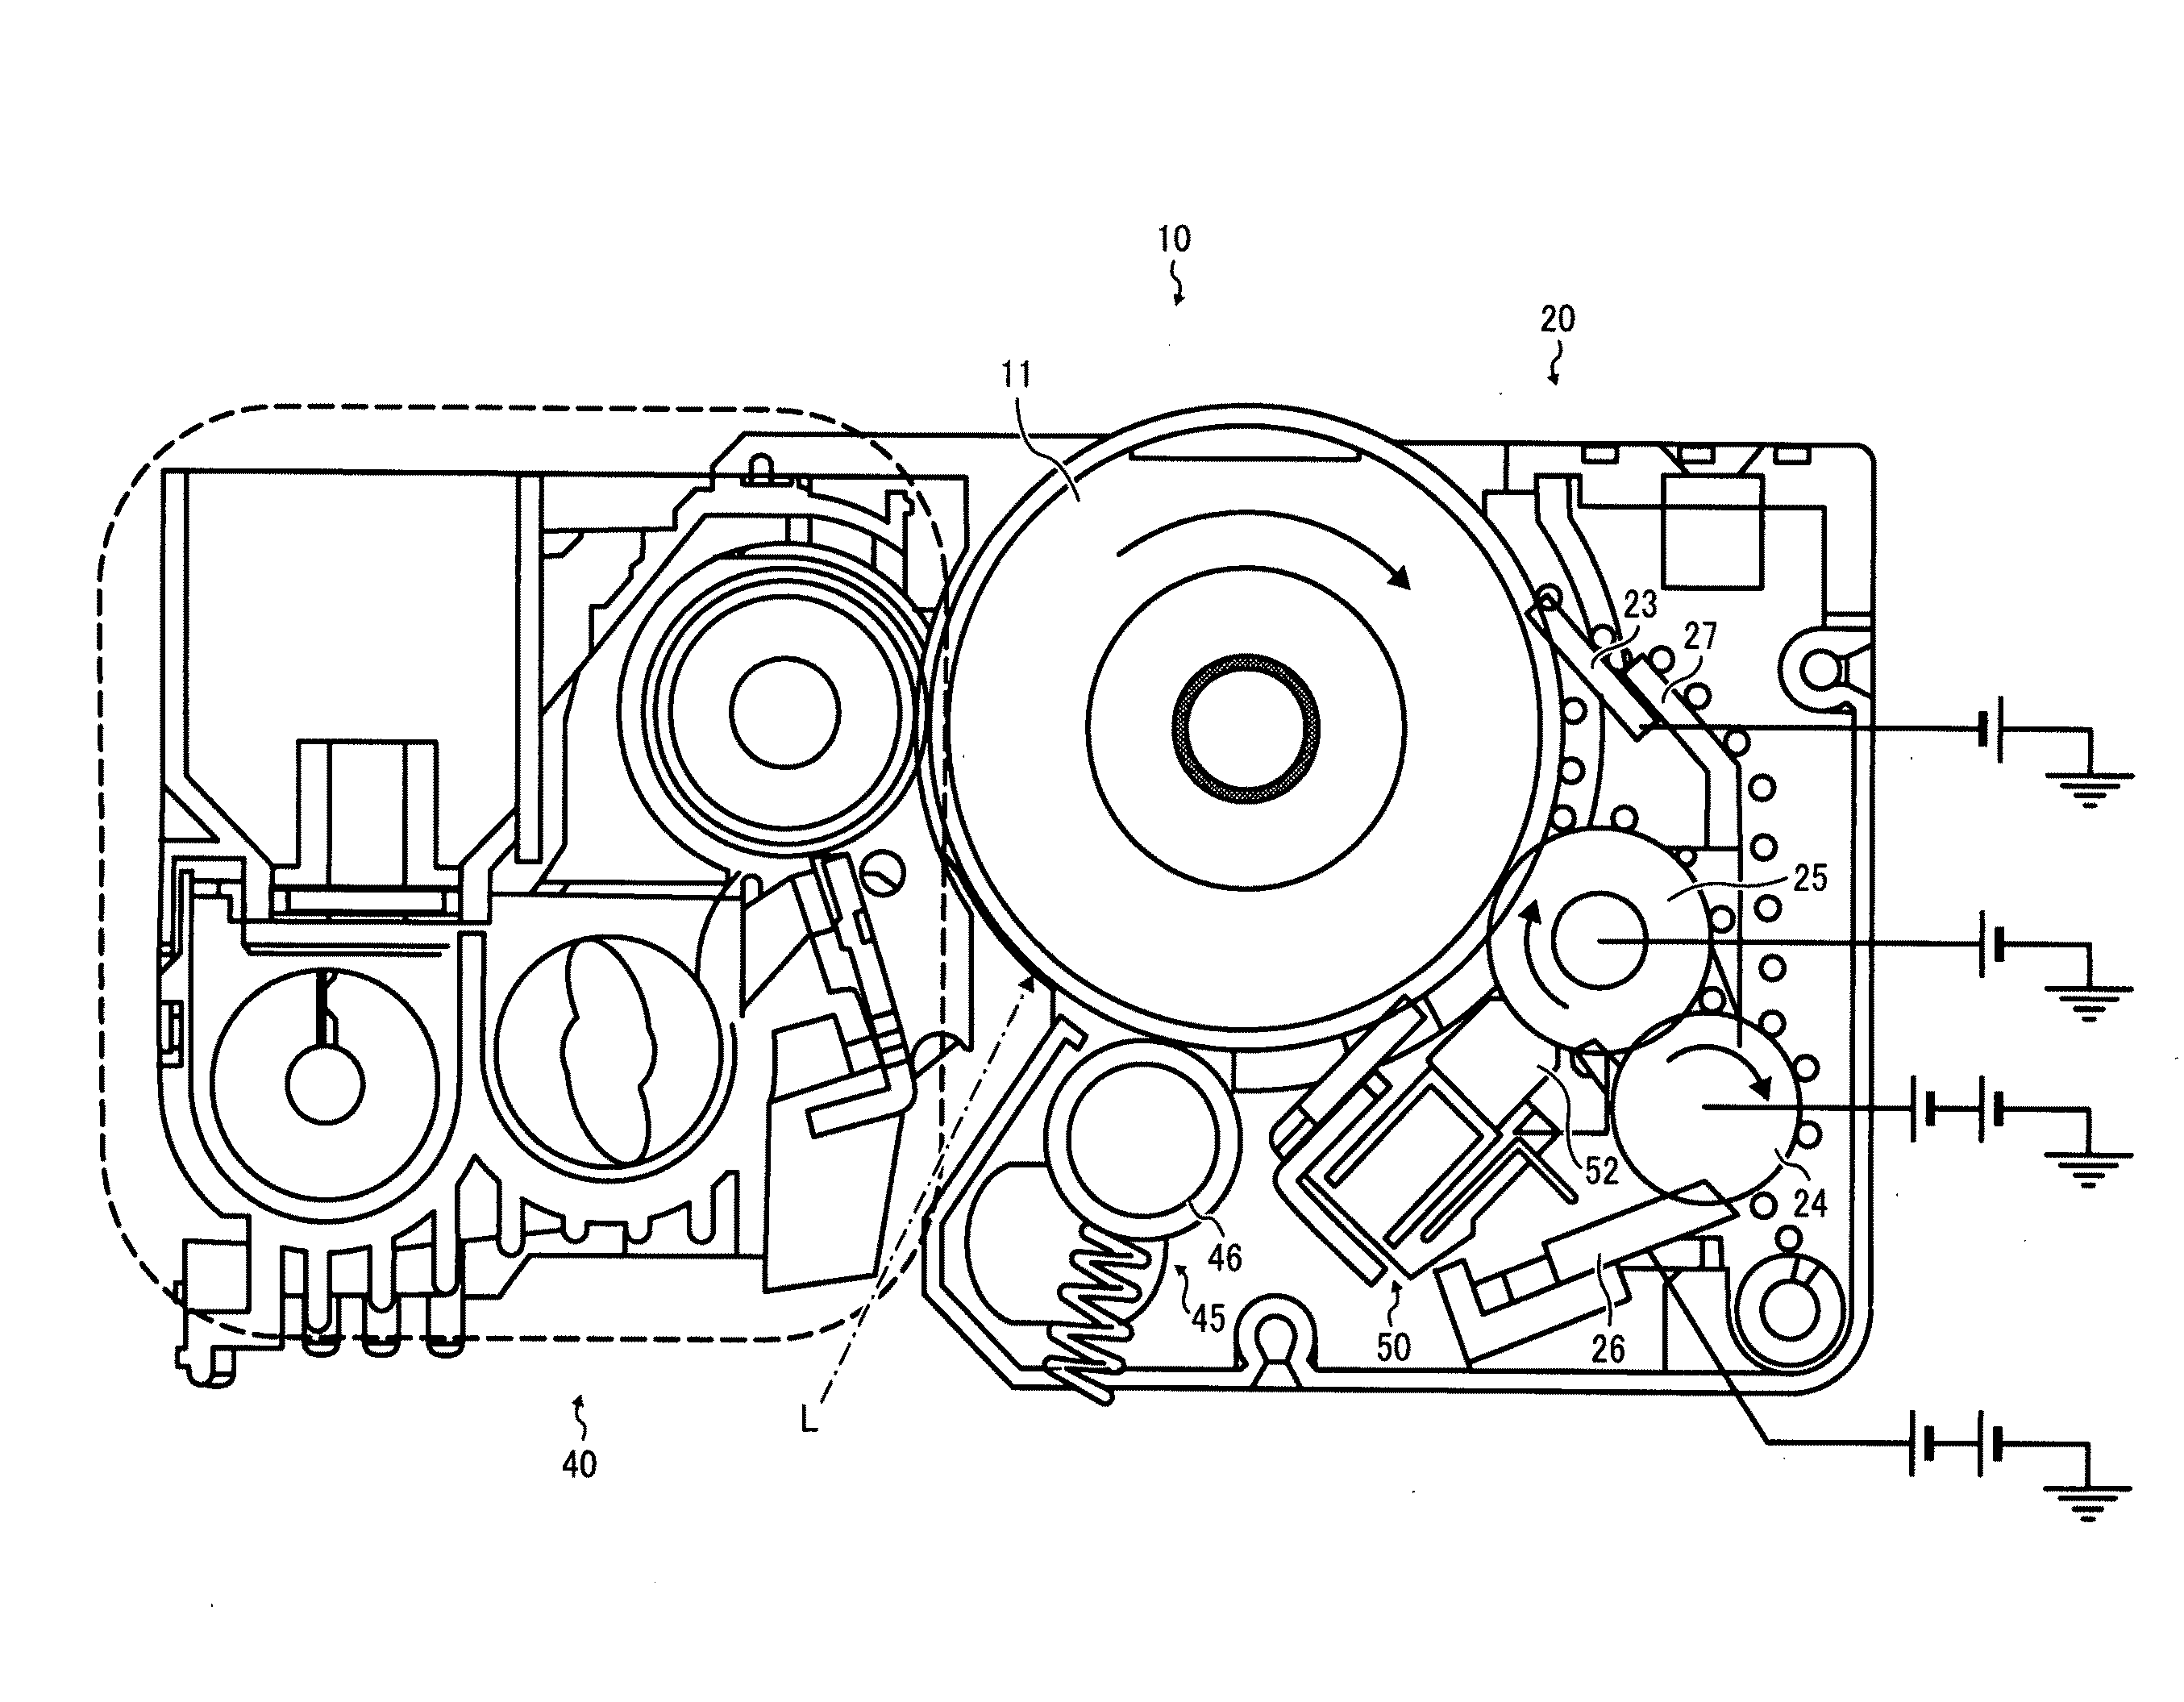 Cleaning unit, process cartridge, and electrophotographic image forming apparatus